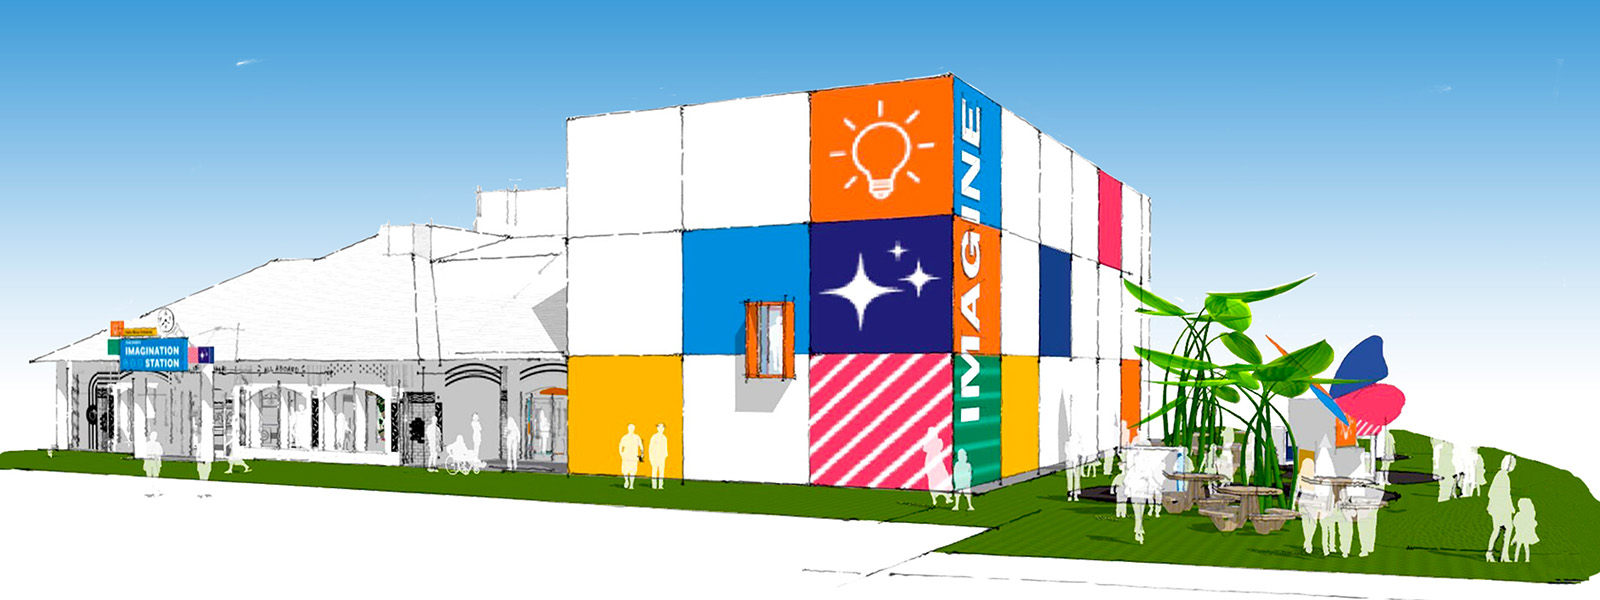 Turner Center is the Future Home of the Meta Shaw Coleman Children’s Imagination Station